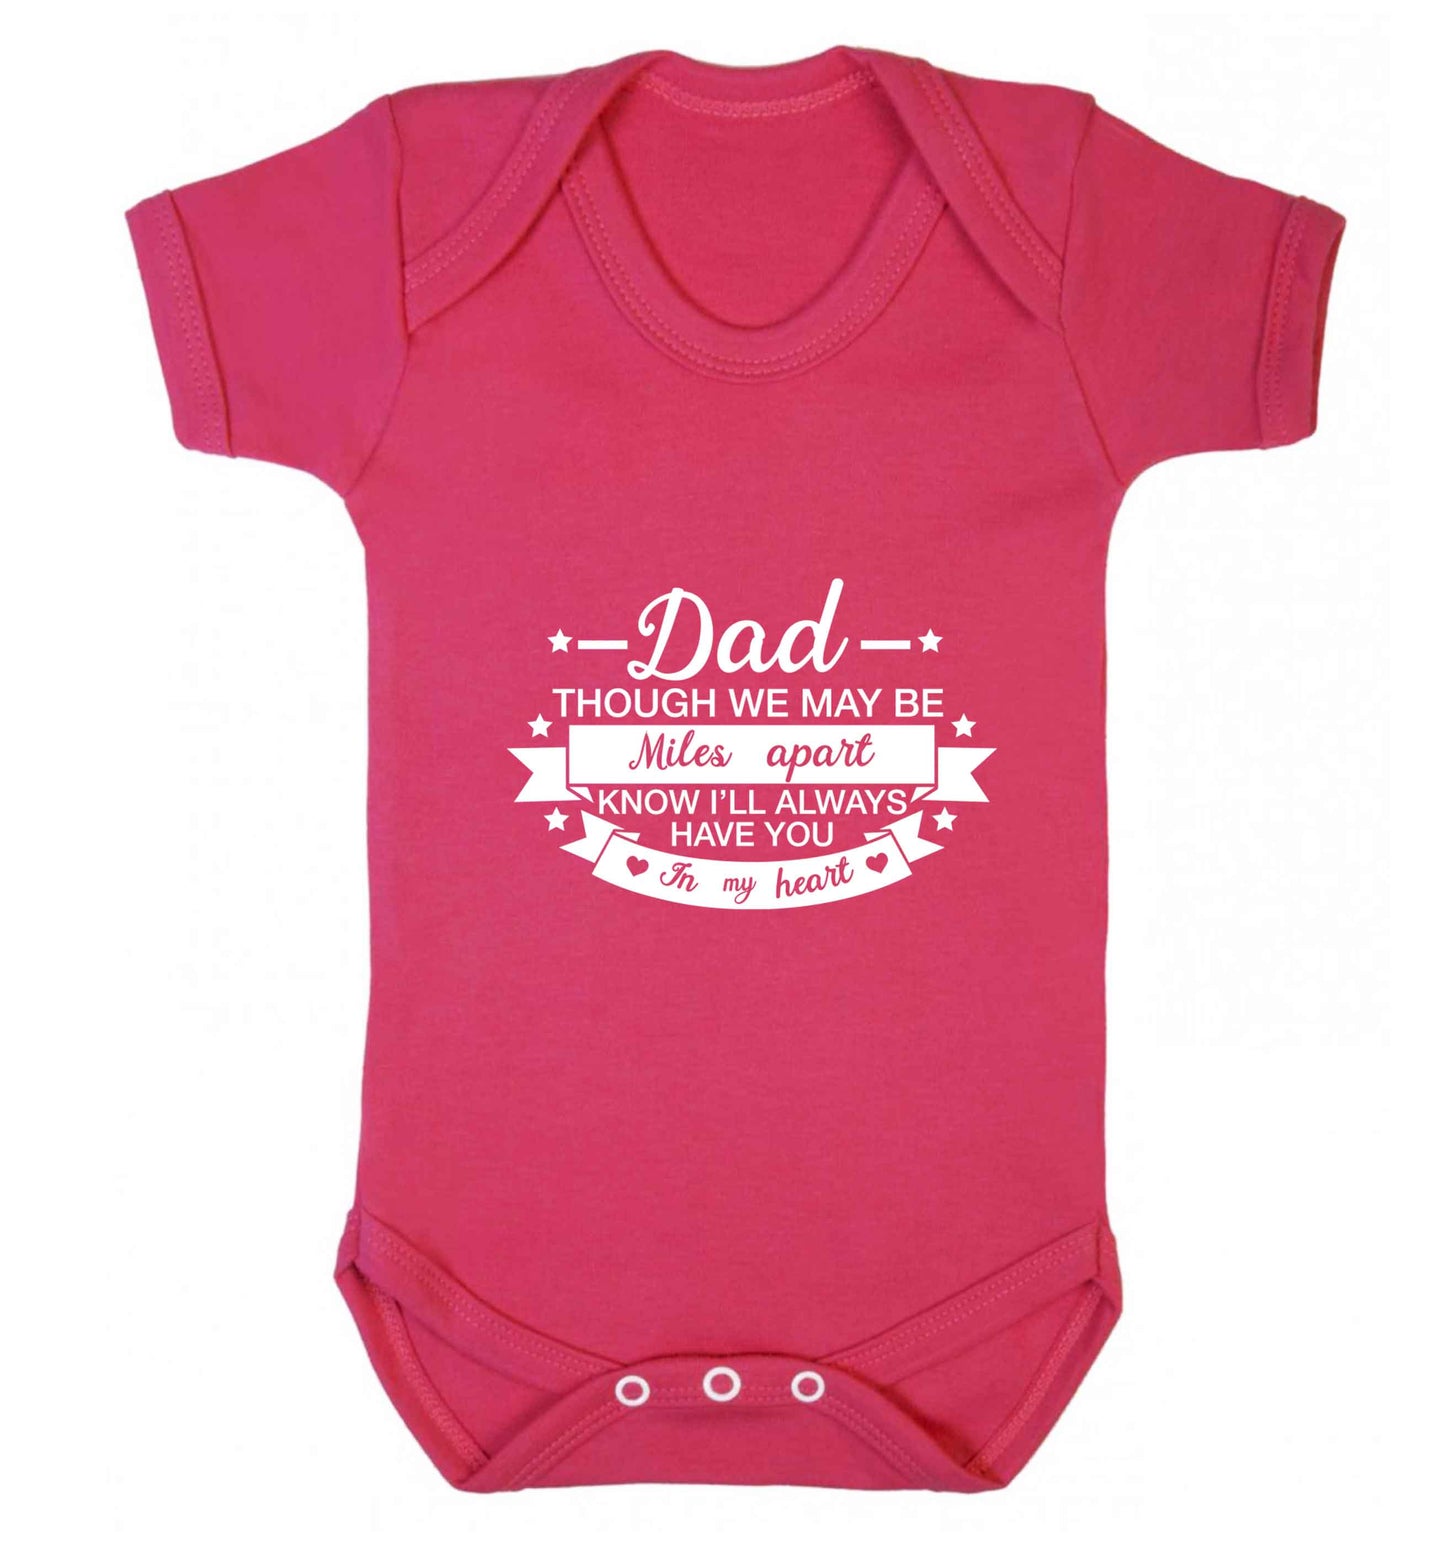 Dad though we are miles apart know I'll always have you in my heart baby vest dark pink 18-24 months